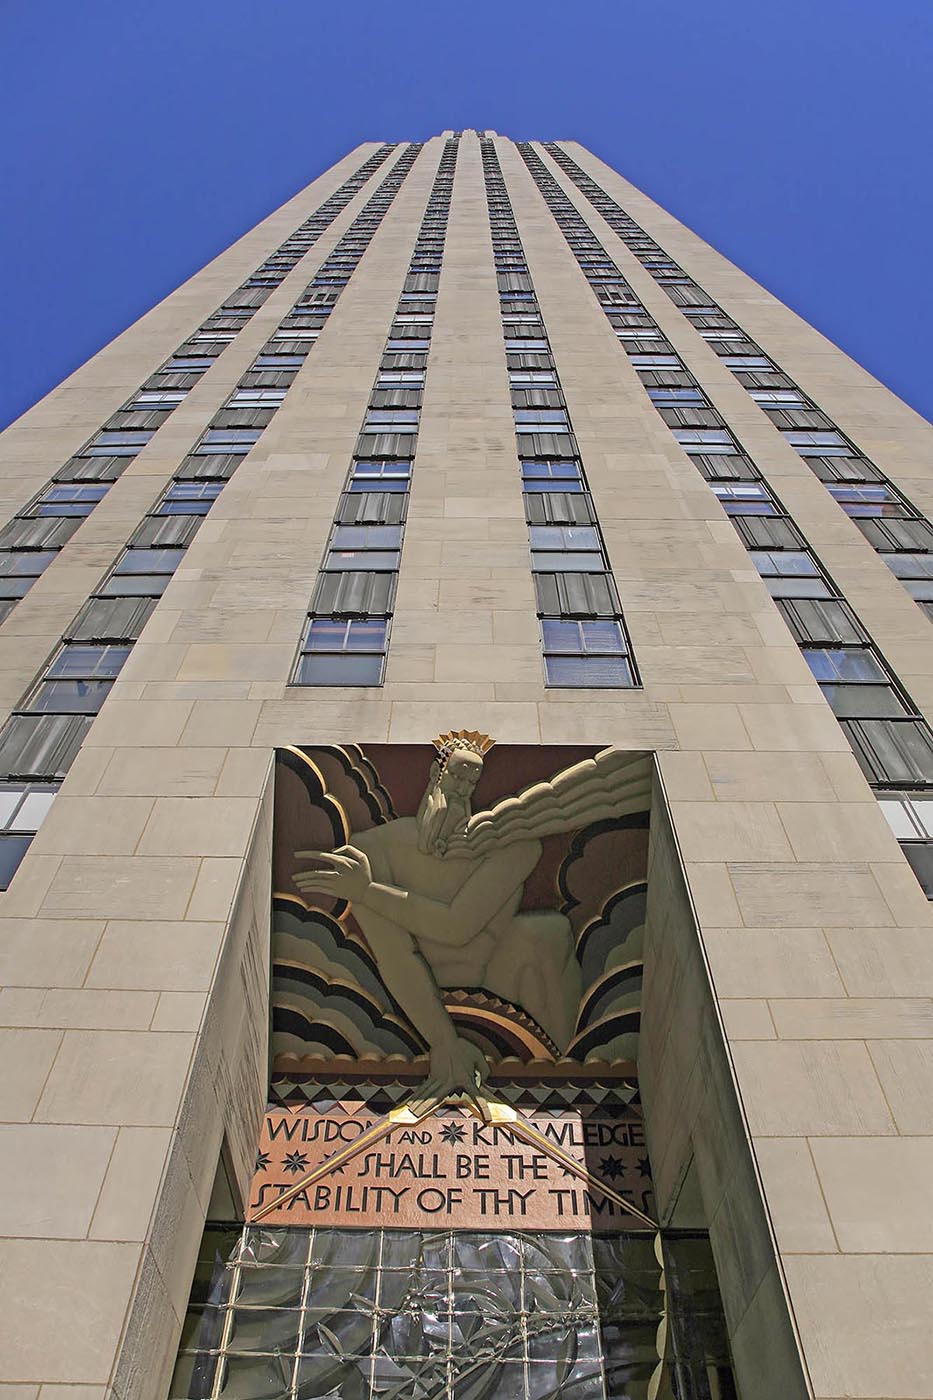 LEE LAWRIE'S “WISDOM, LIGHT and SOUND” sculpture atop the entrance to 30 ROCKEFELLER CENTER in NEW YORK CITY.  - Architecture photography by Eagle Visions Photography